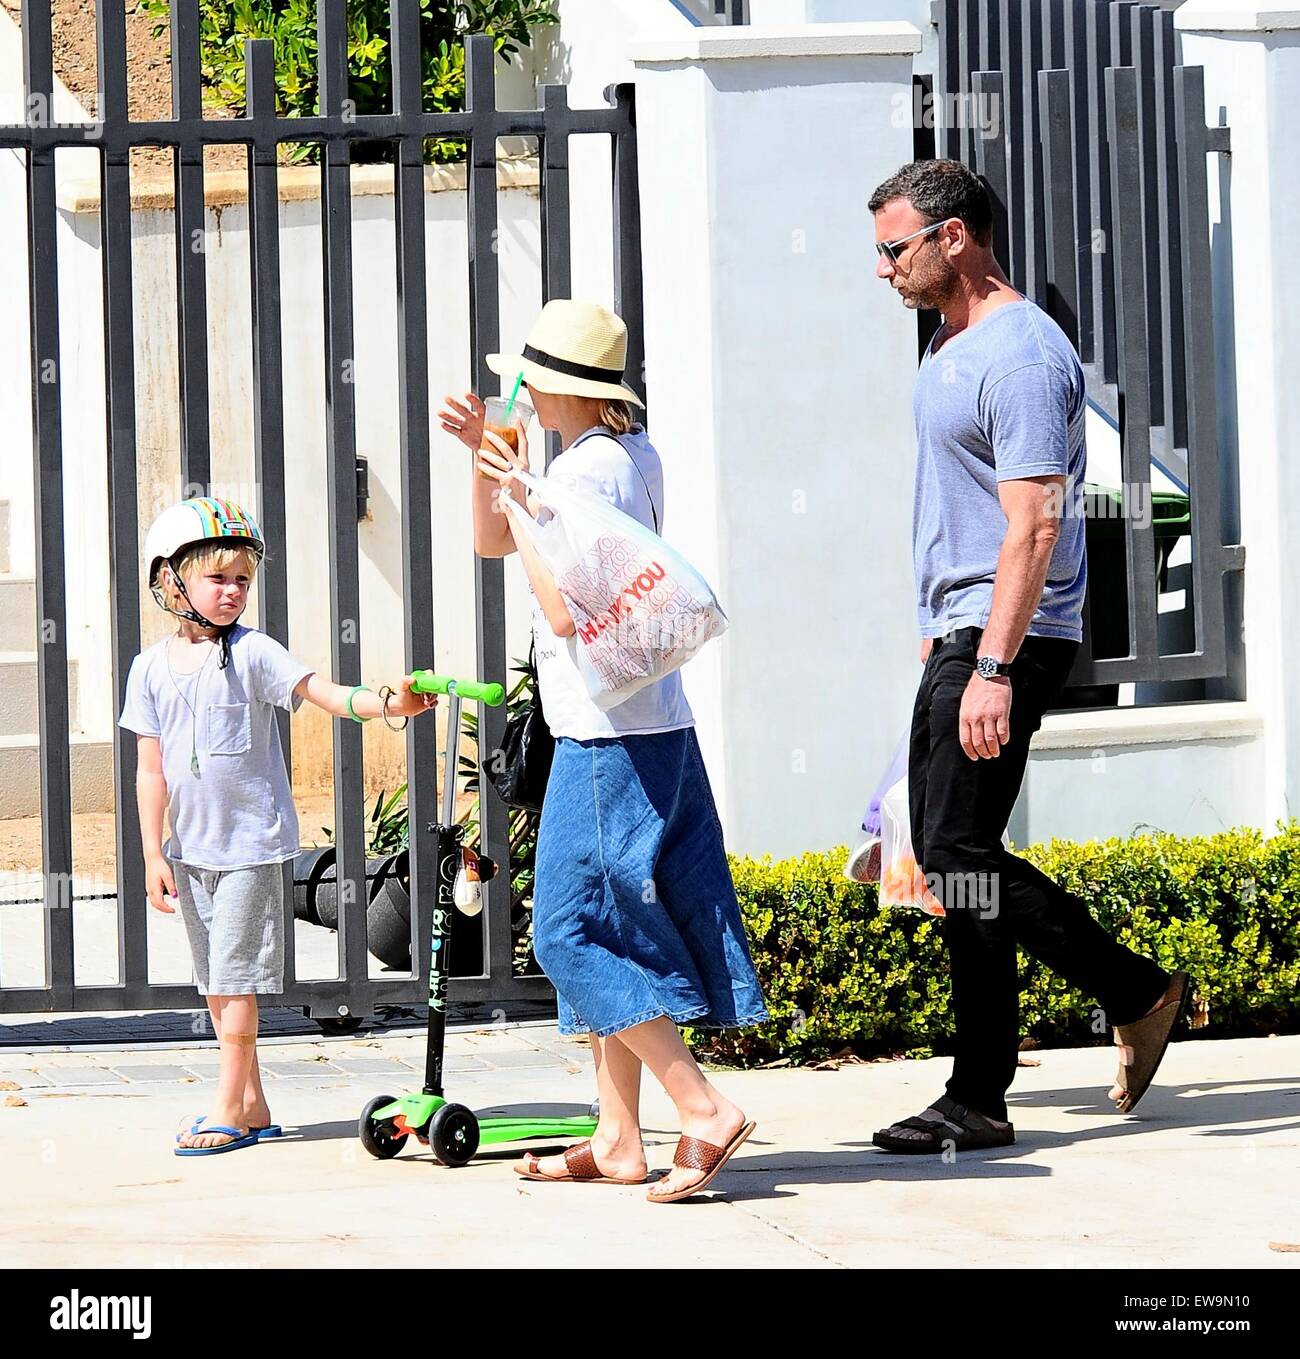 Naomi Watts and Liev Schreiber shopping at Farmers Market with their children  Featuring: Samuel Kai Schreiber, Naomi Watts, Liev Schreiber Where: Los Angeles, California, United States When: 19 Apr 2015 Stock Photo